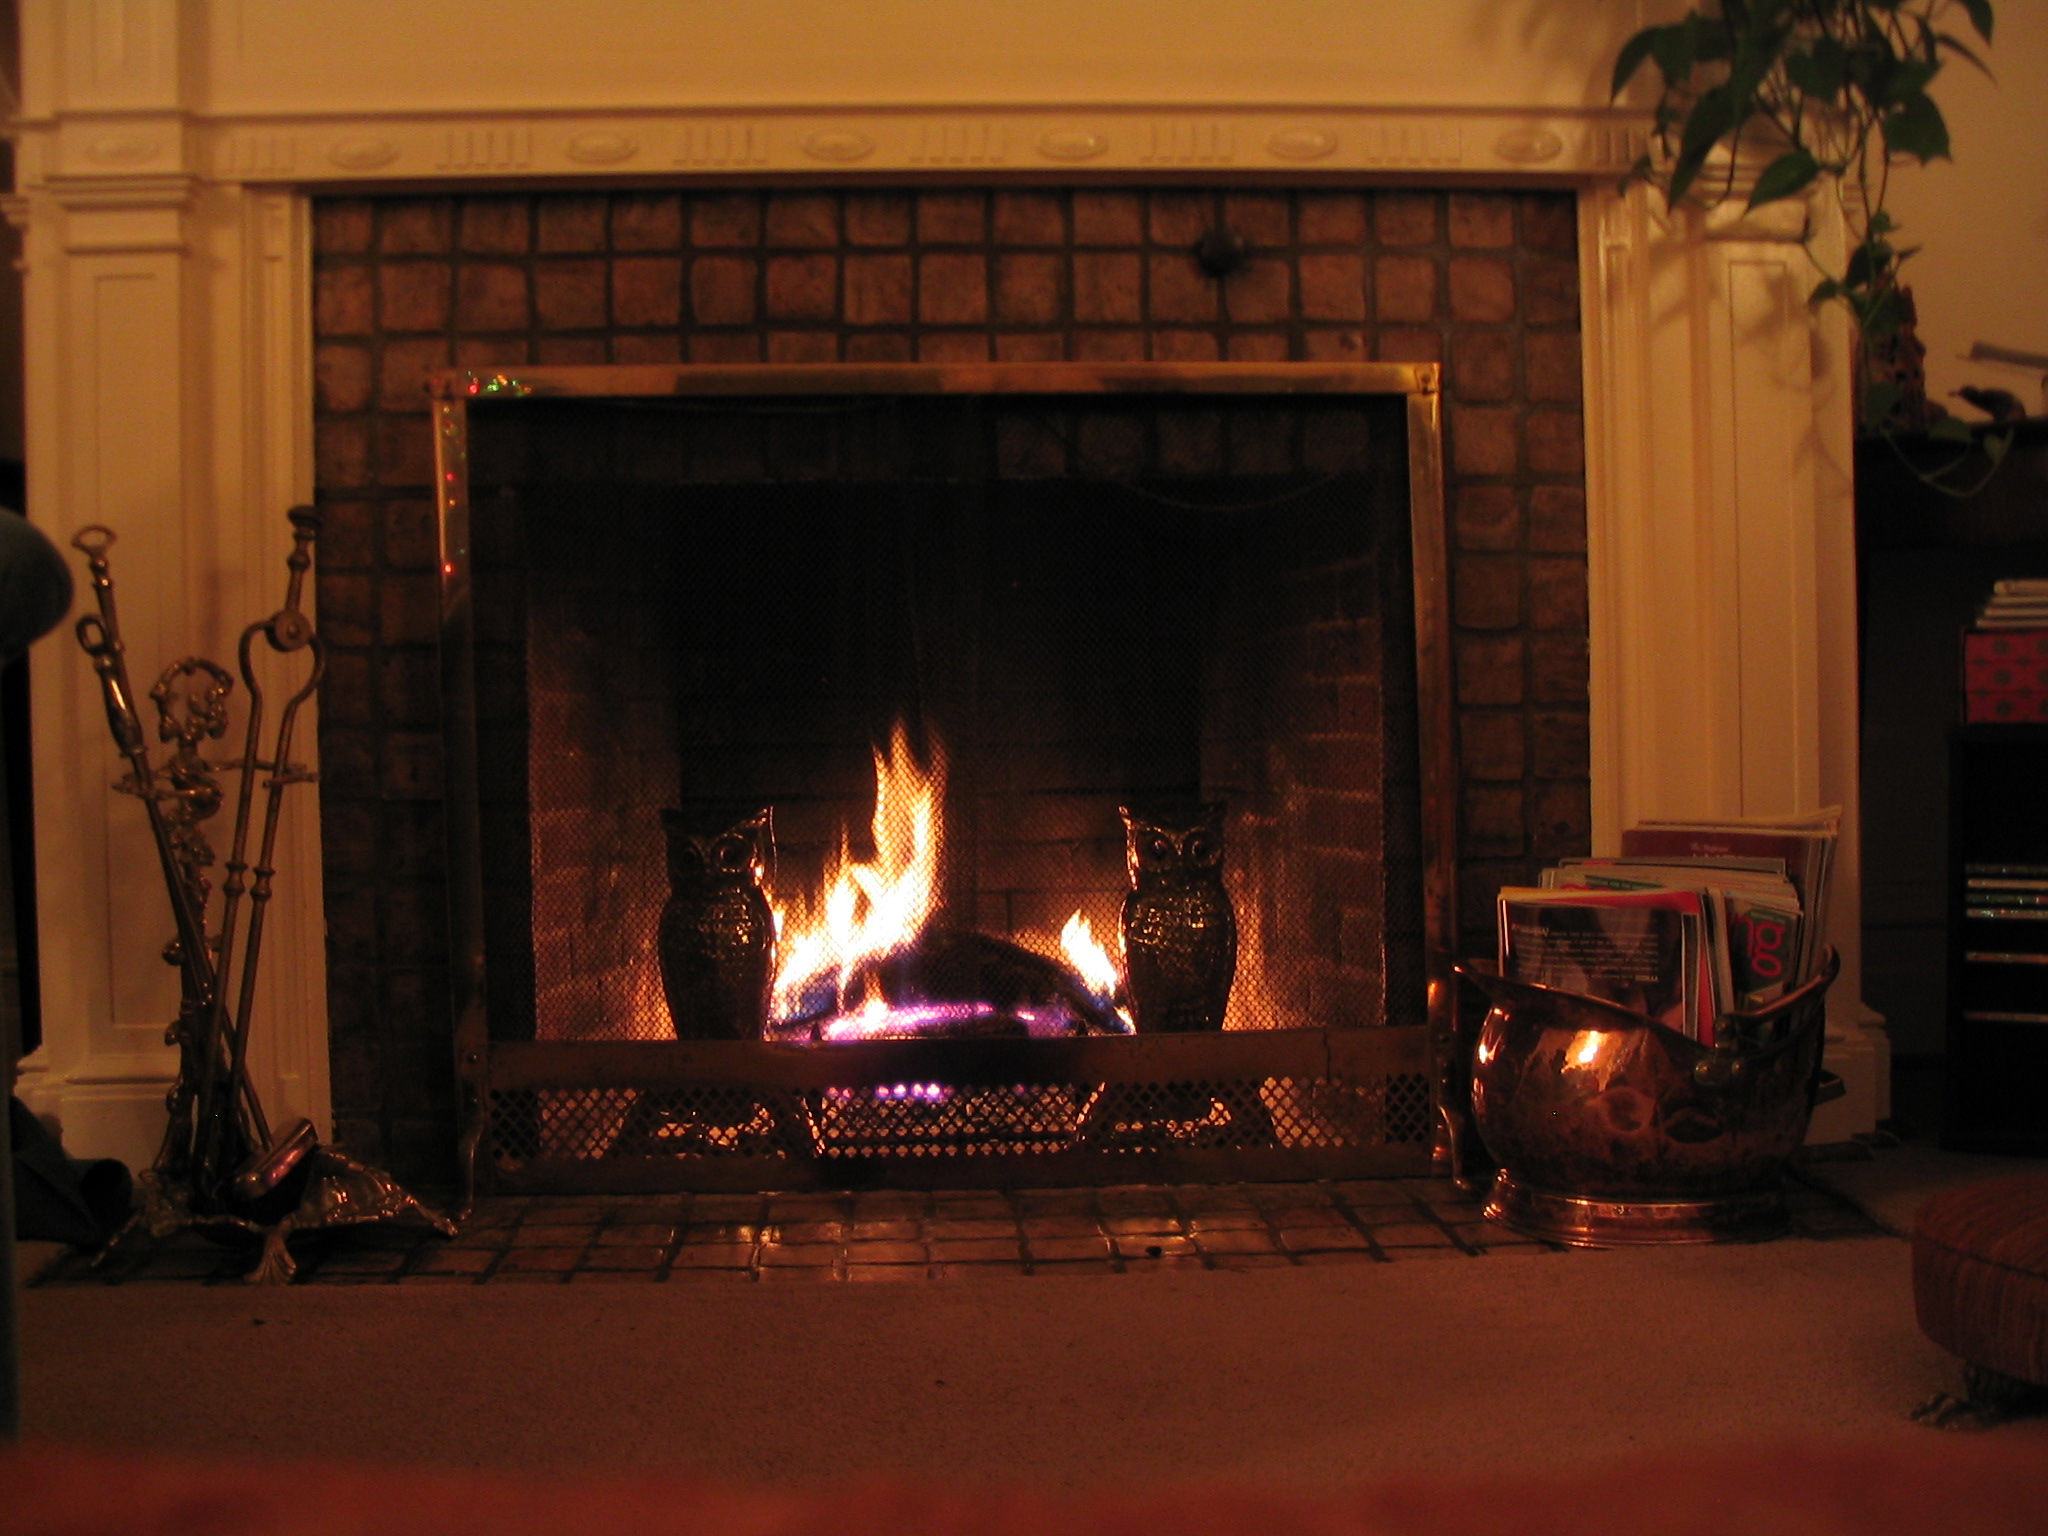 Fireplaces during winter